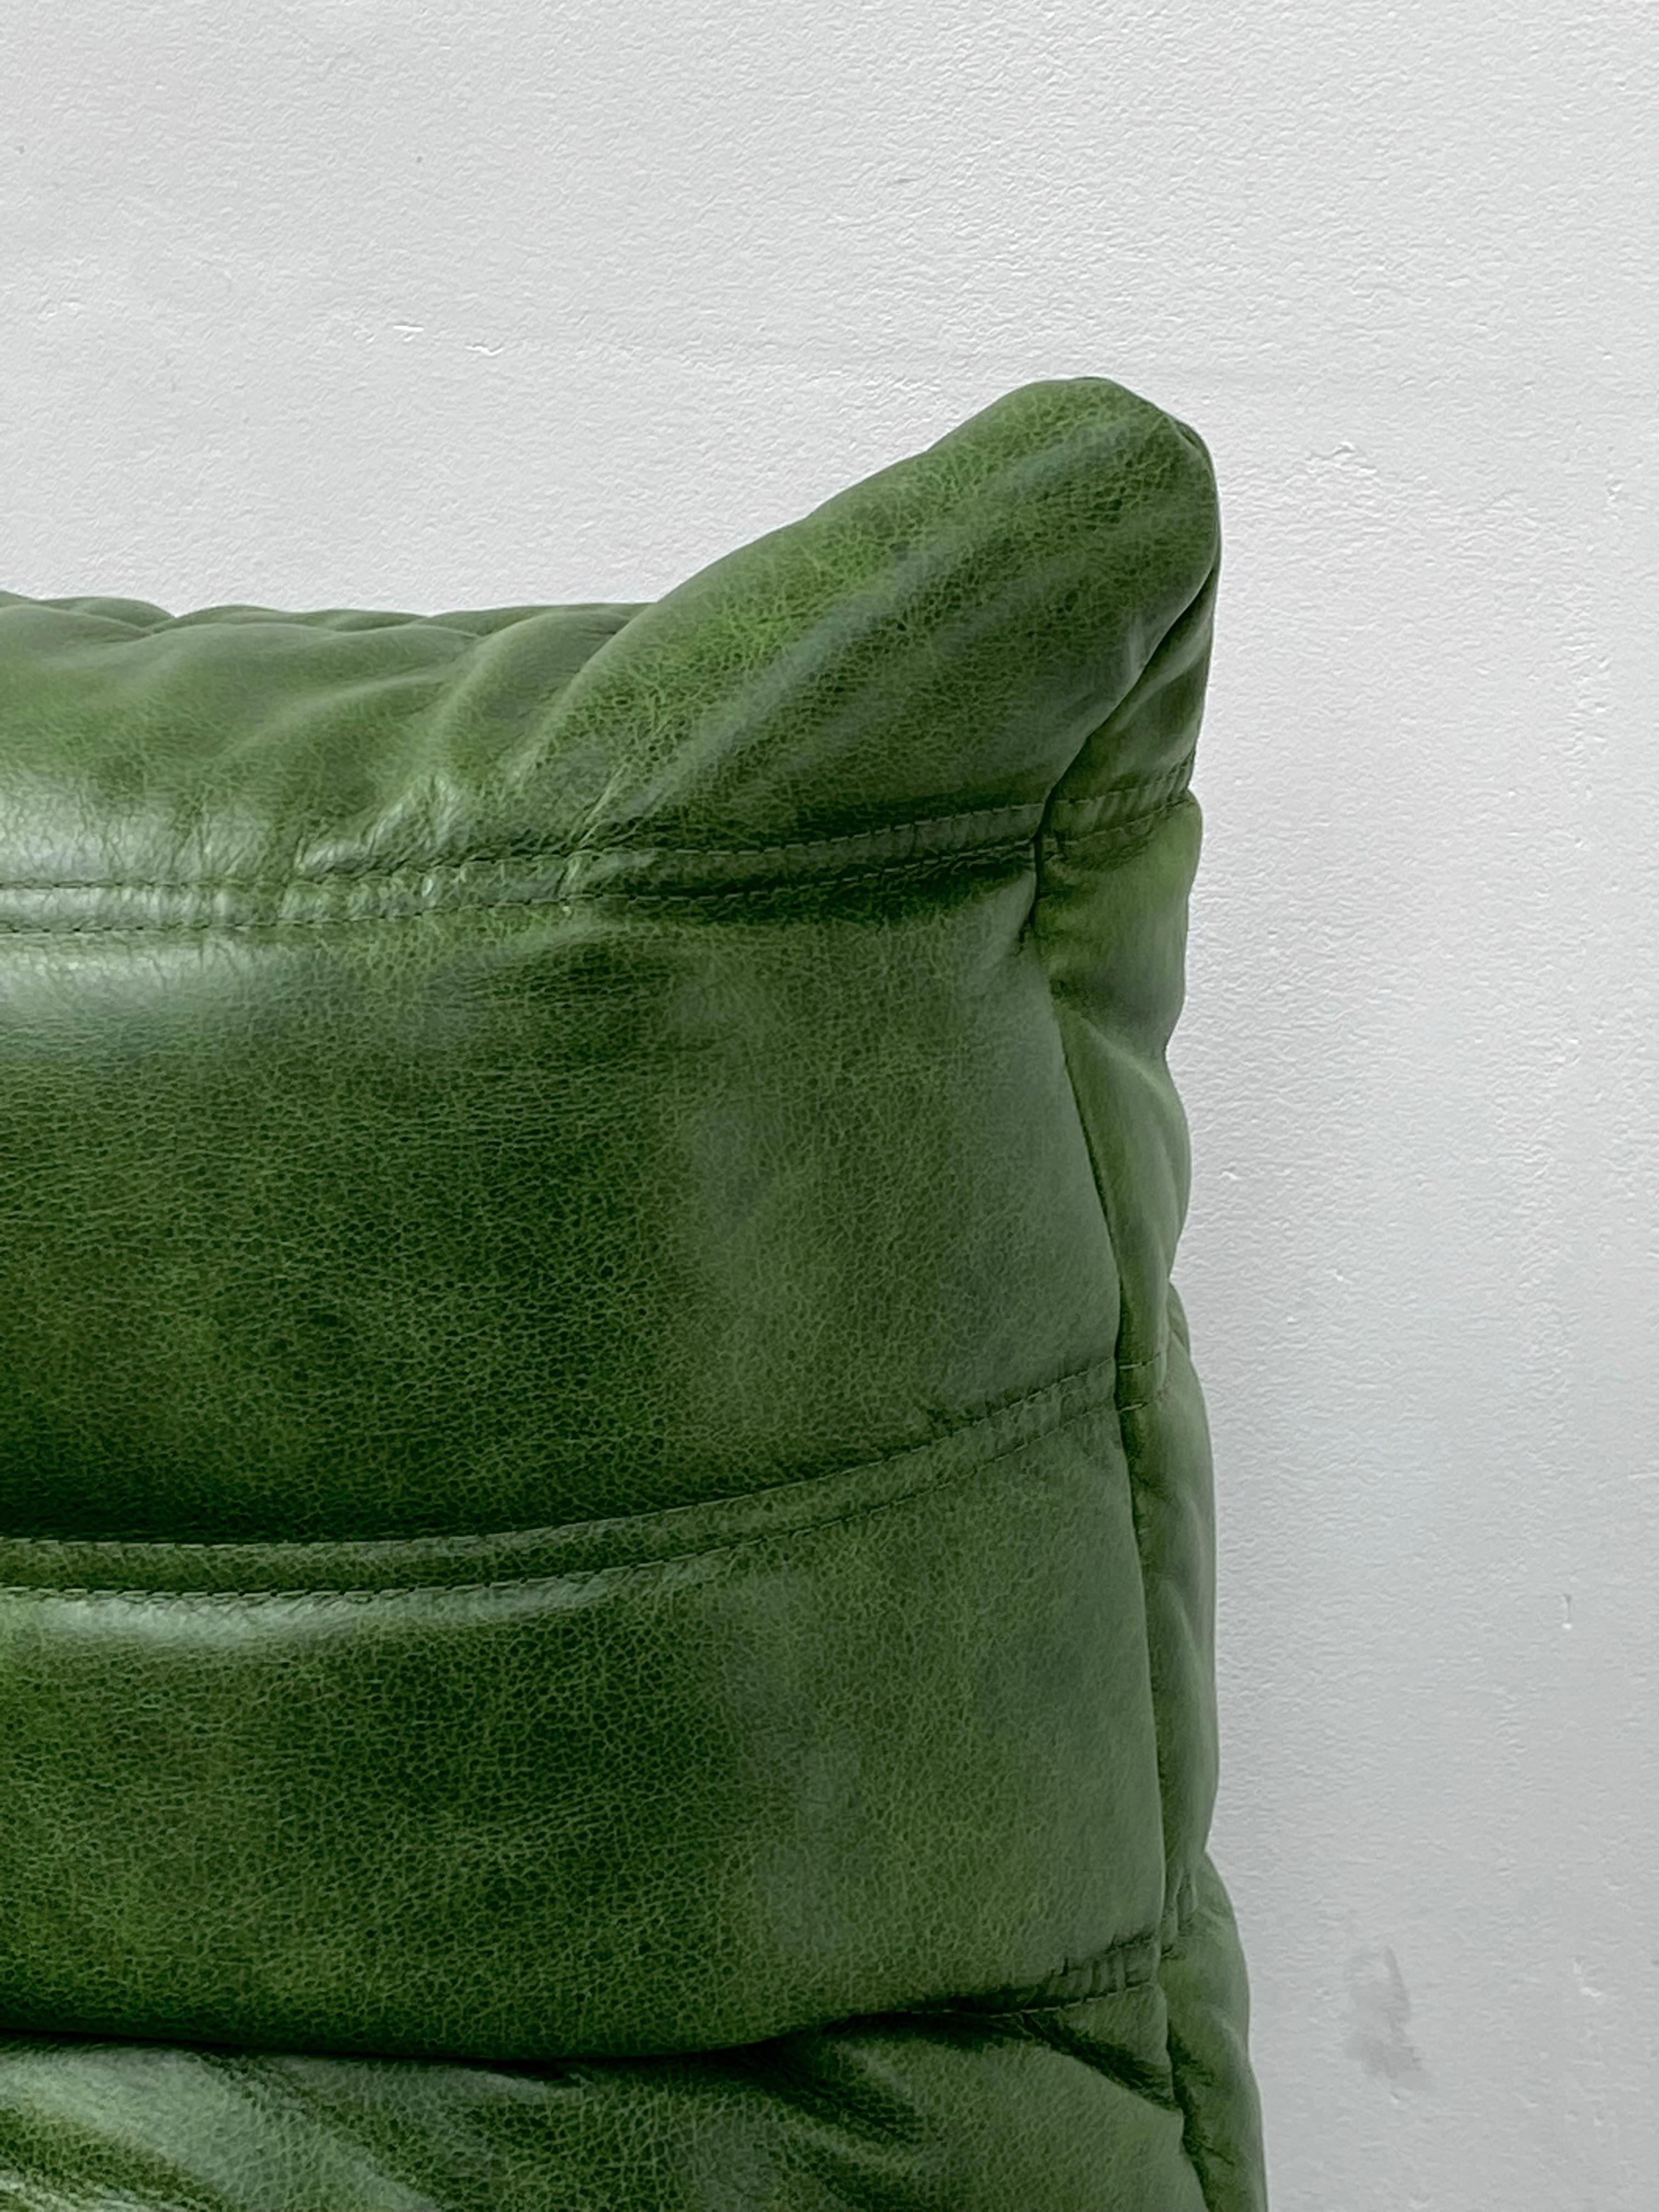 20th Century French Vintage Togo Chair in Green Leather by Michel Ducaroy for Ligne Roset.